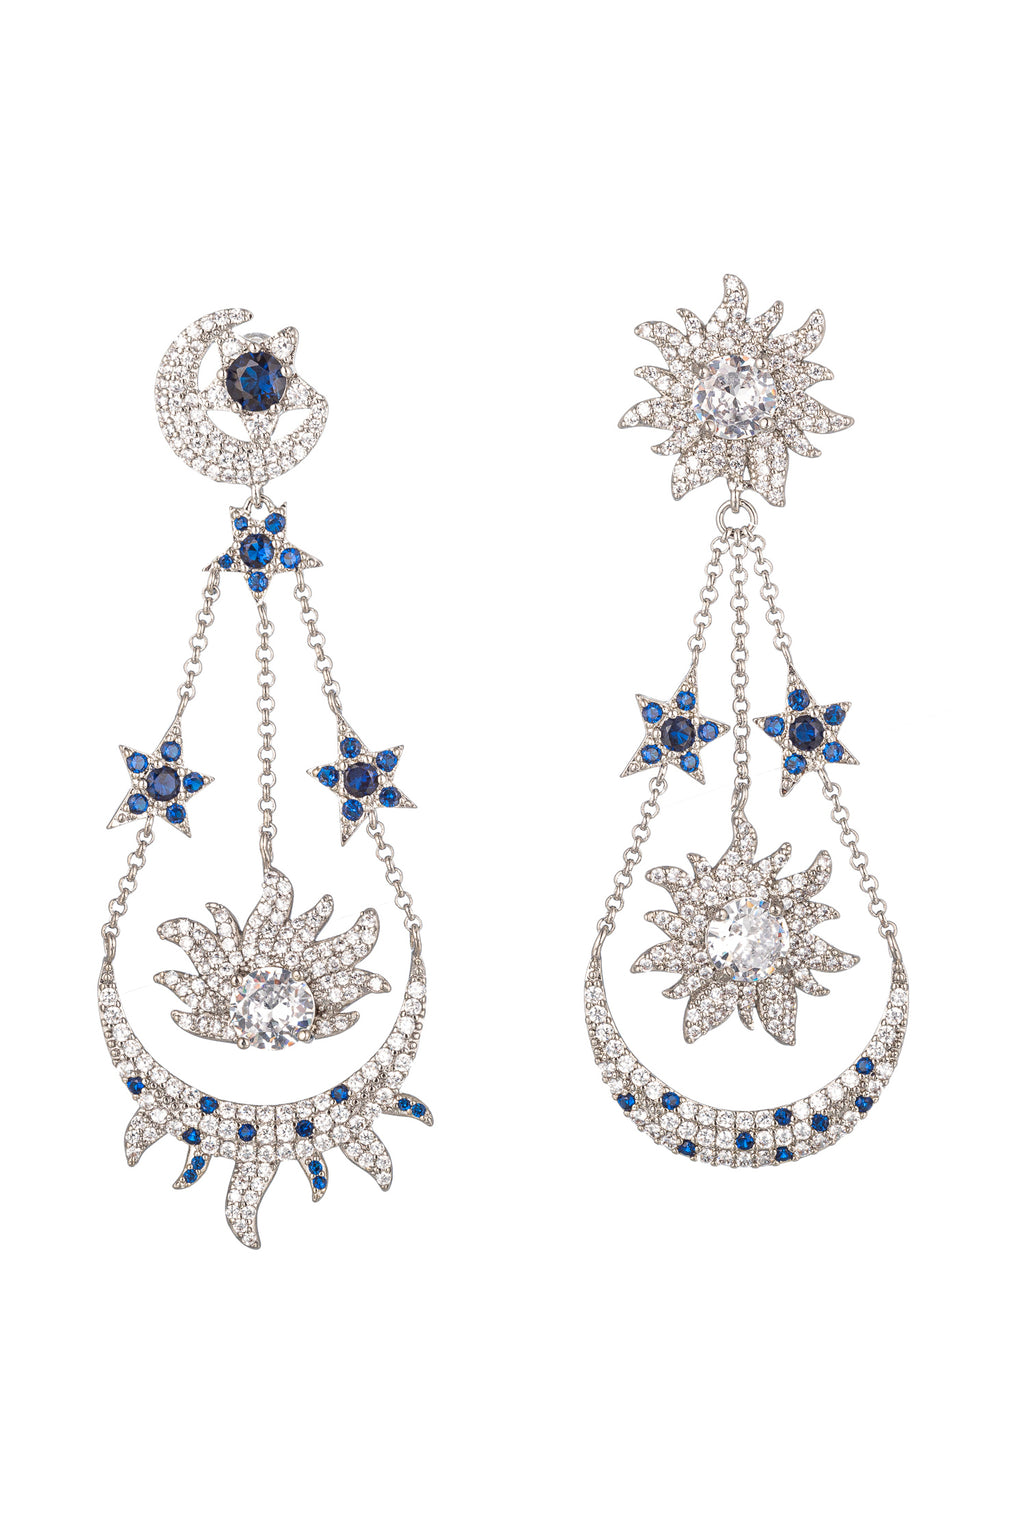 Silver brass sun and moon drop earrings studded with CZ crystals. 